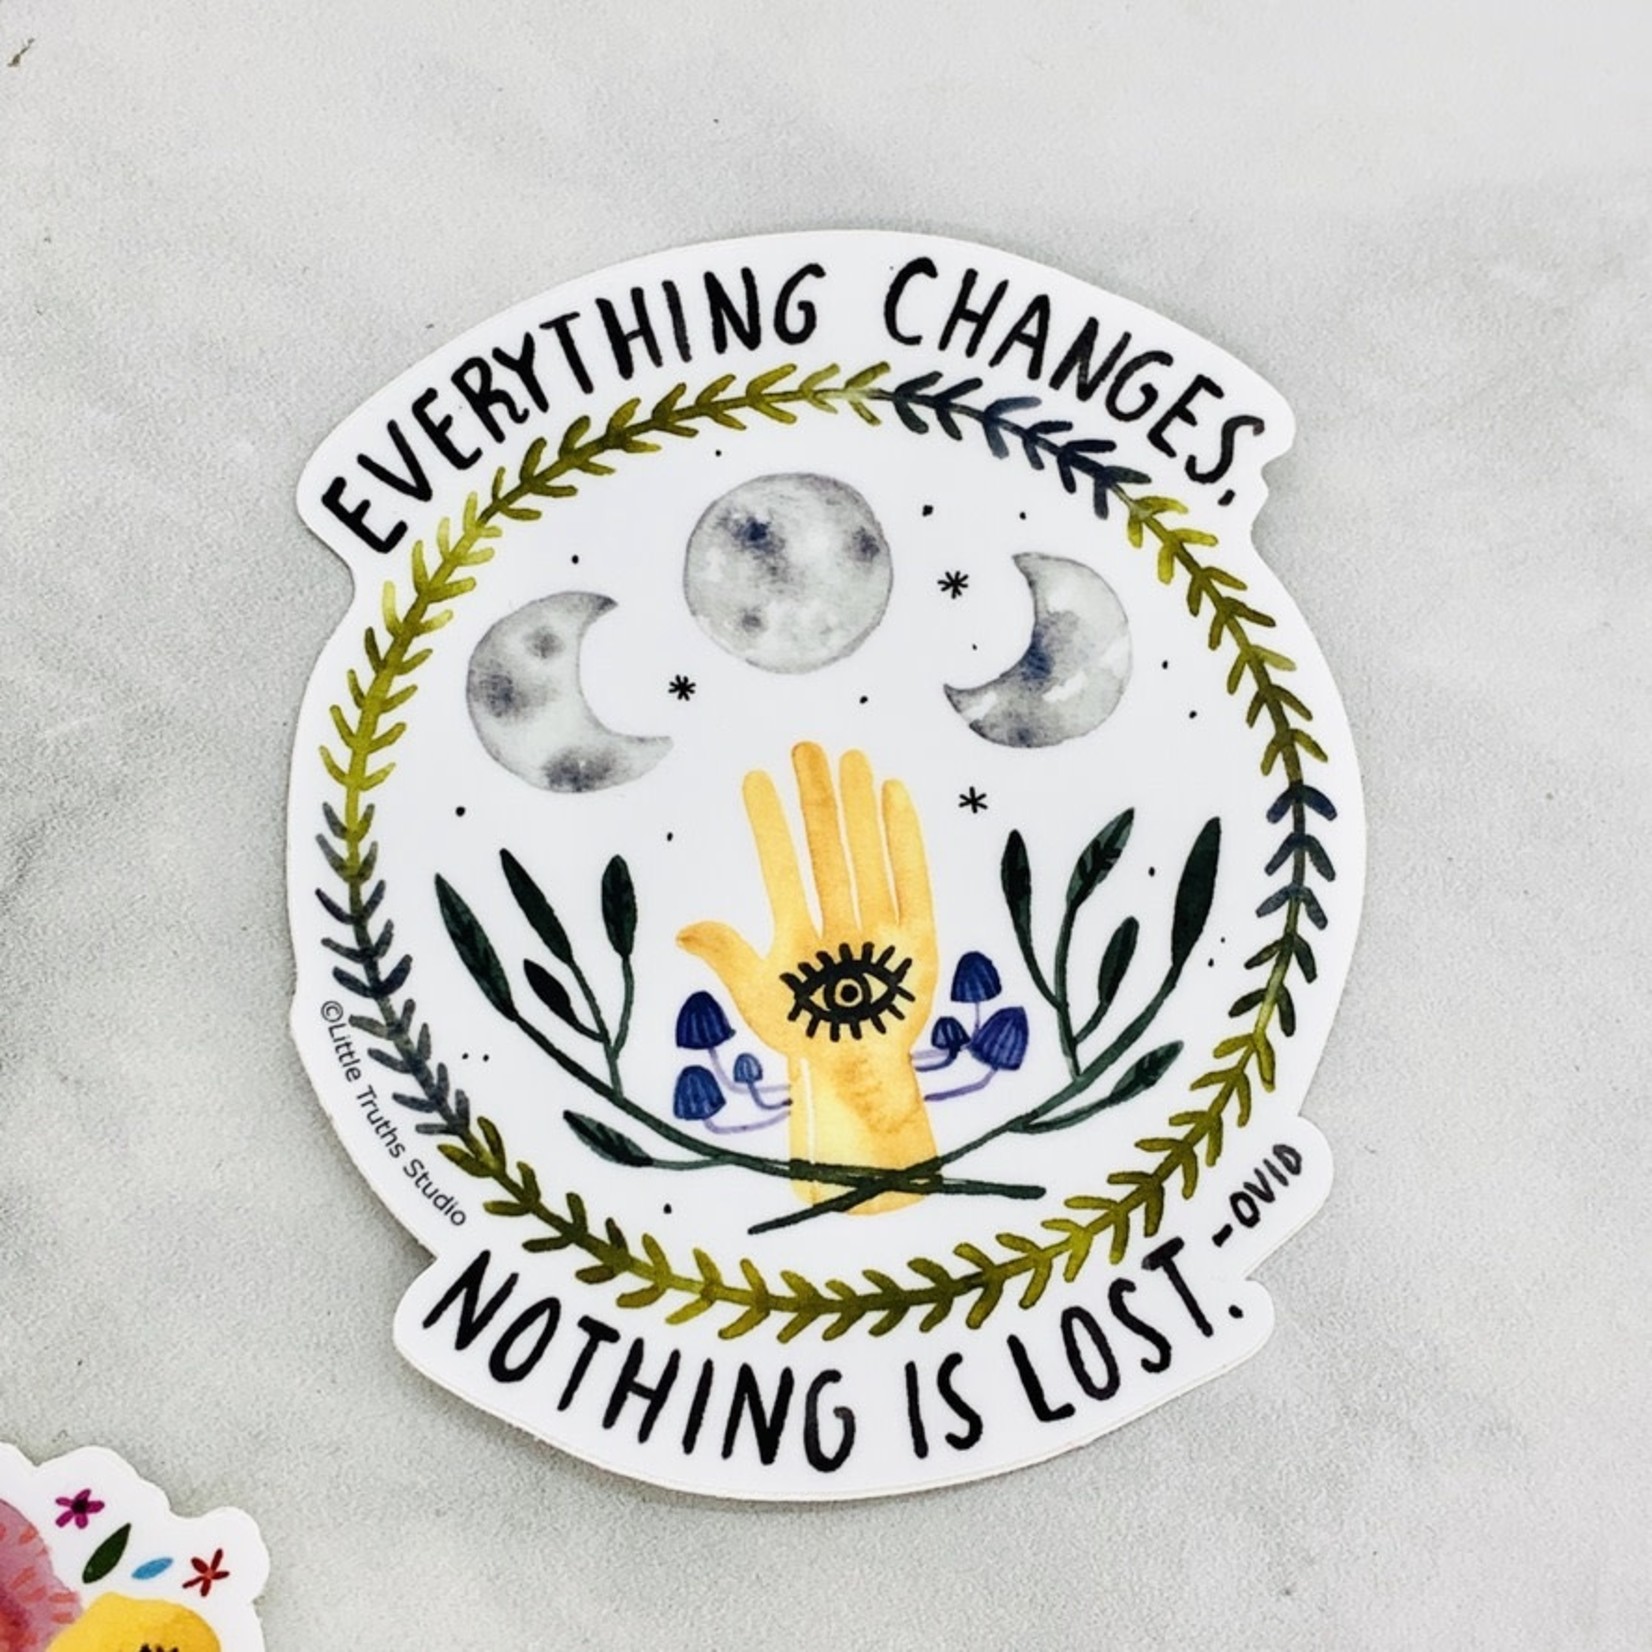 Everything Changes Nothing is Lost Sticker DNO